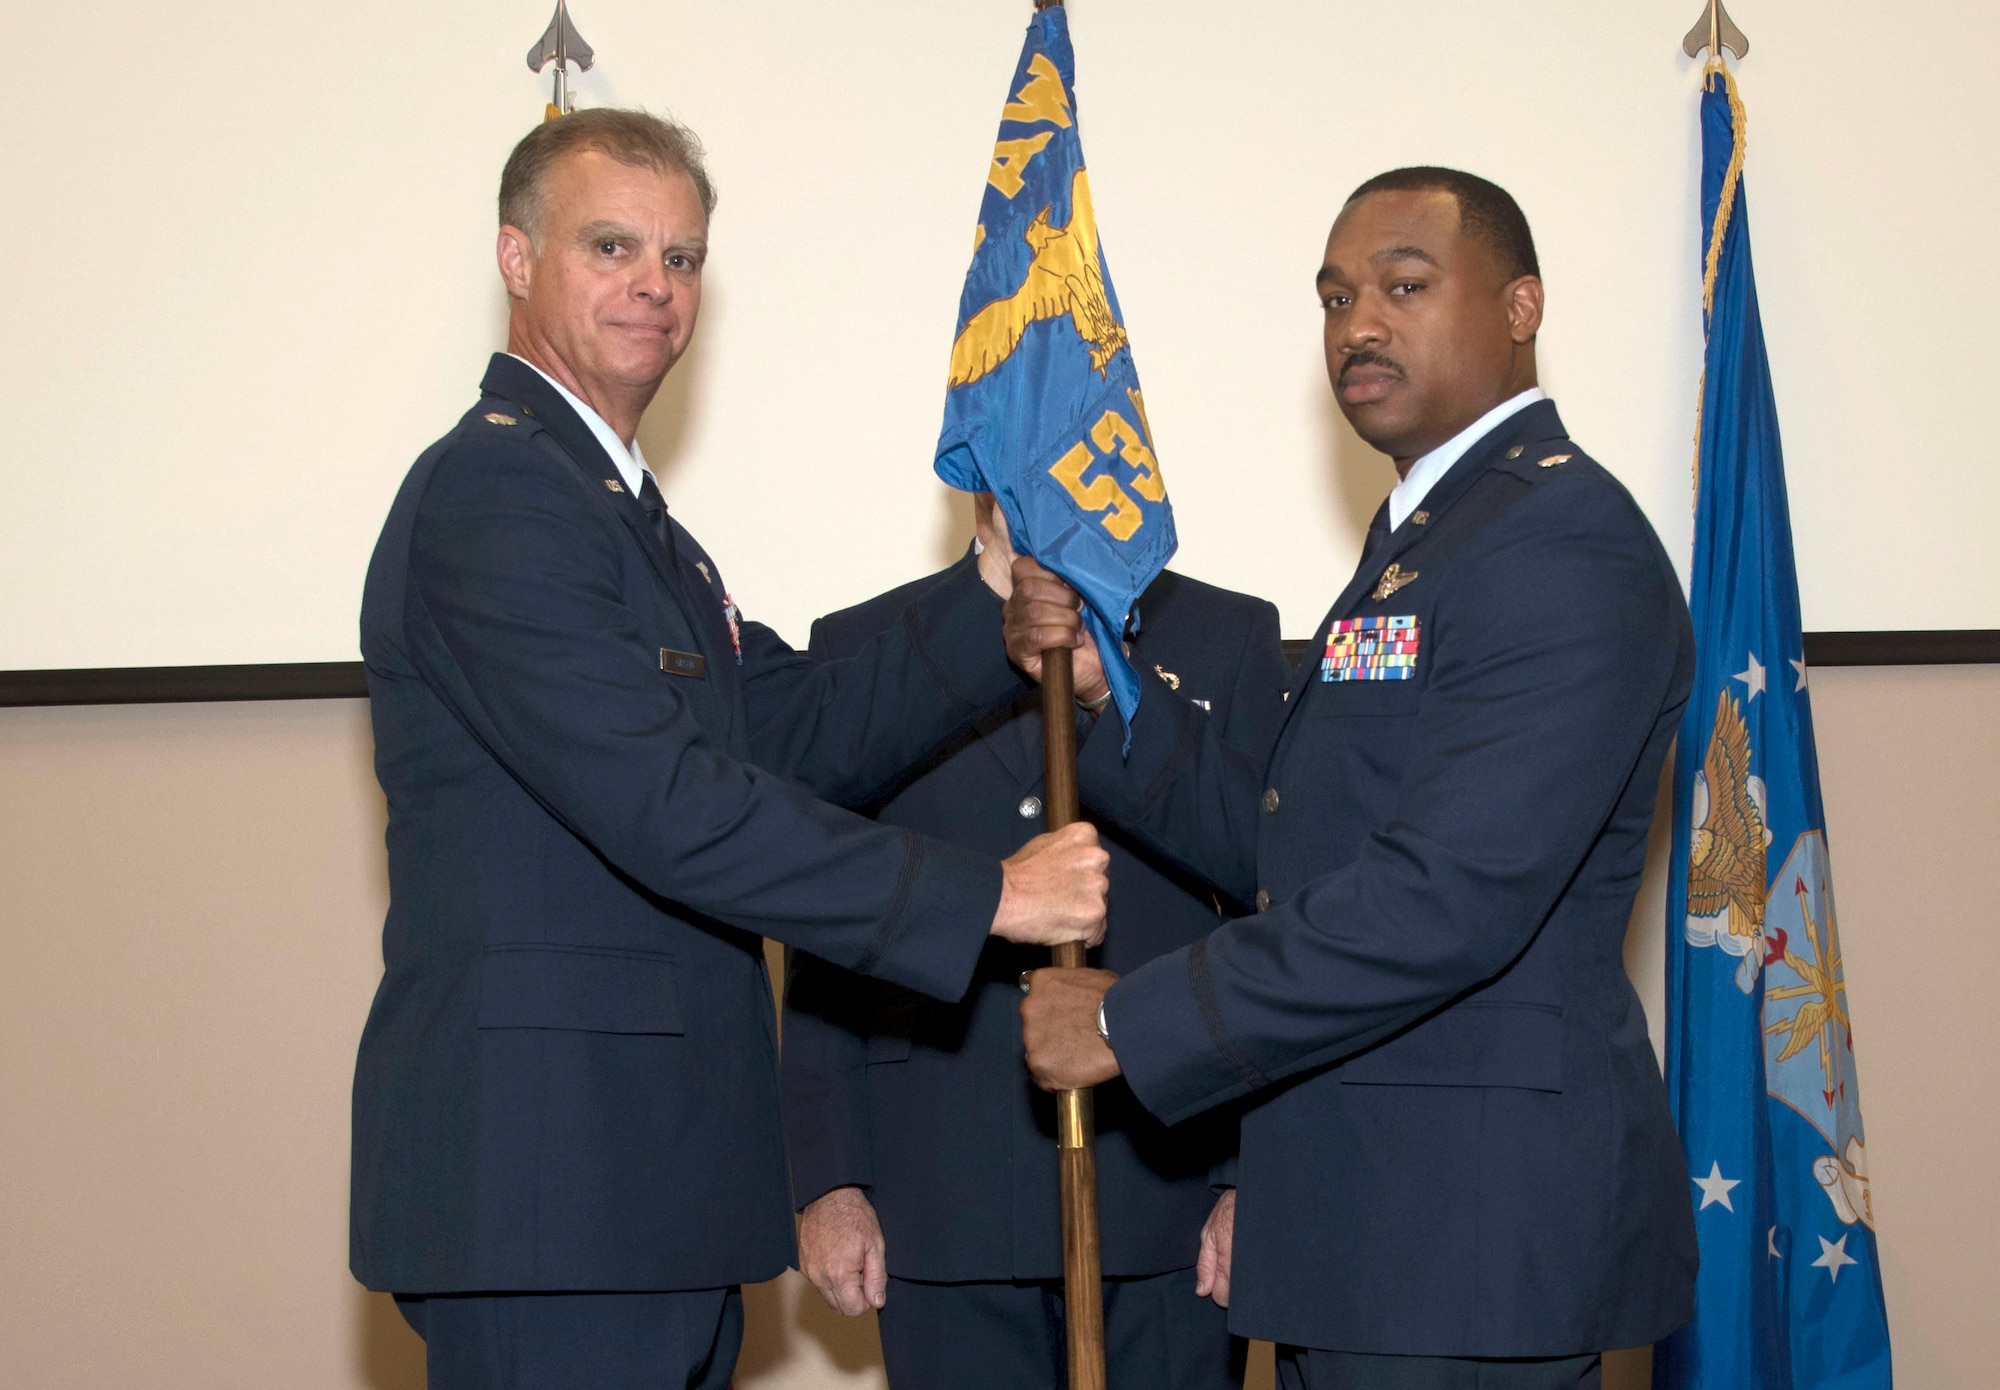 Lt. Col. Keith Gibson, 403rd Operations Group deputy commander, passes the 53rd Weather Reconnaissance Squadron guidon to Lt. Col. Kevin Green, right. Green took command of the 53rd Weather Reconnaissance Squadron during a change of command ceremony at the 53rd WRS Auditorium, Keesler Air Force Base, Mississippi July 15, 2016. (U.S. Air Force photo/Staff Sgt. Nicholas Monteleone)